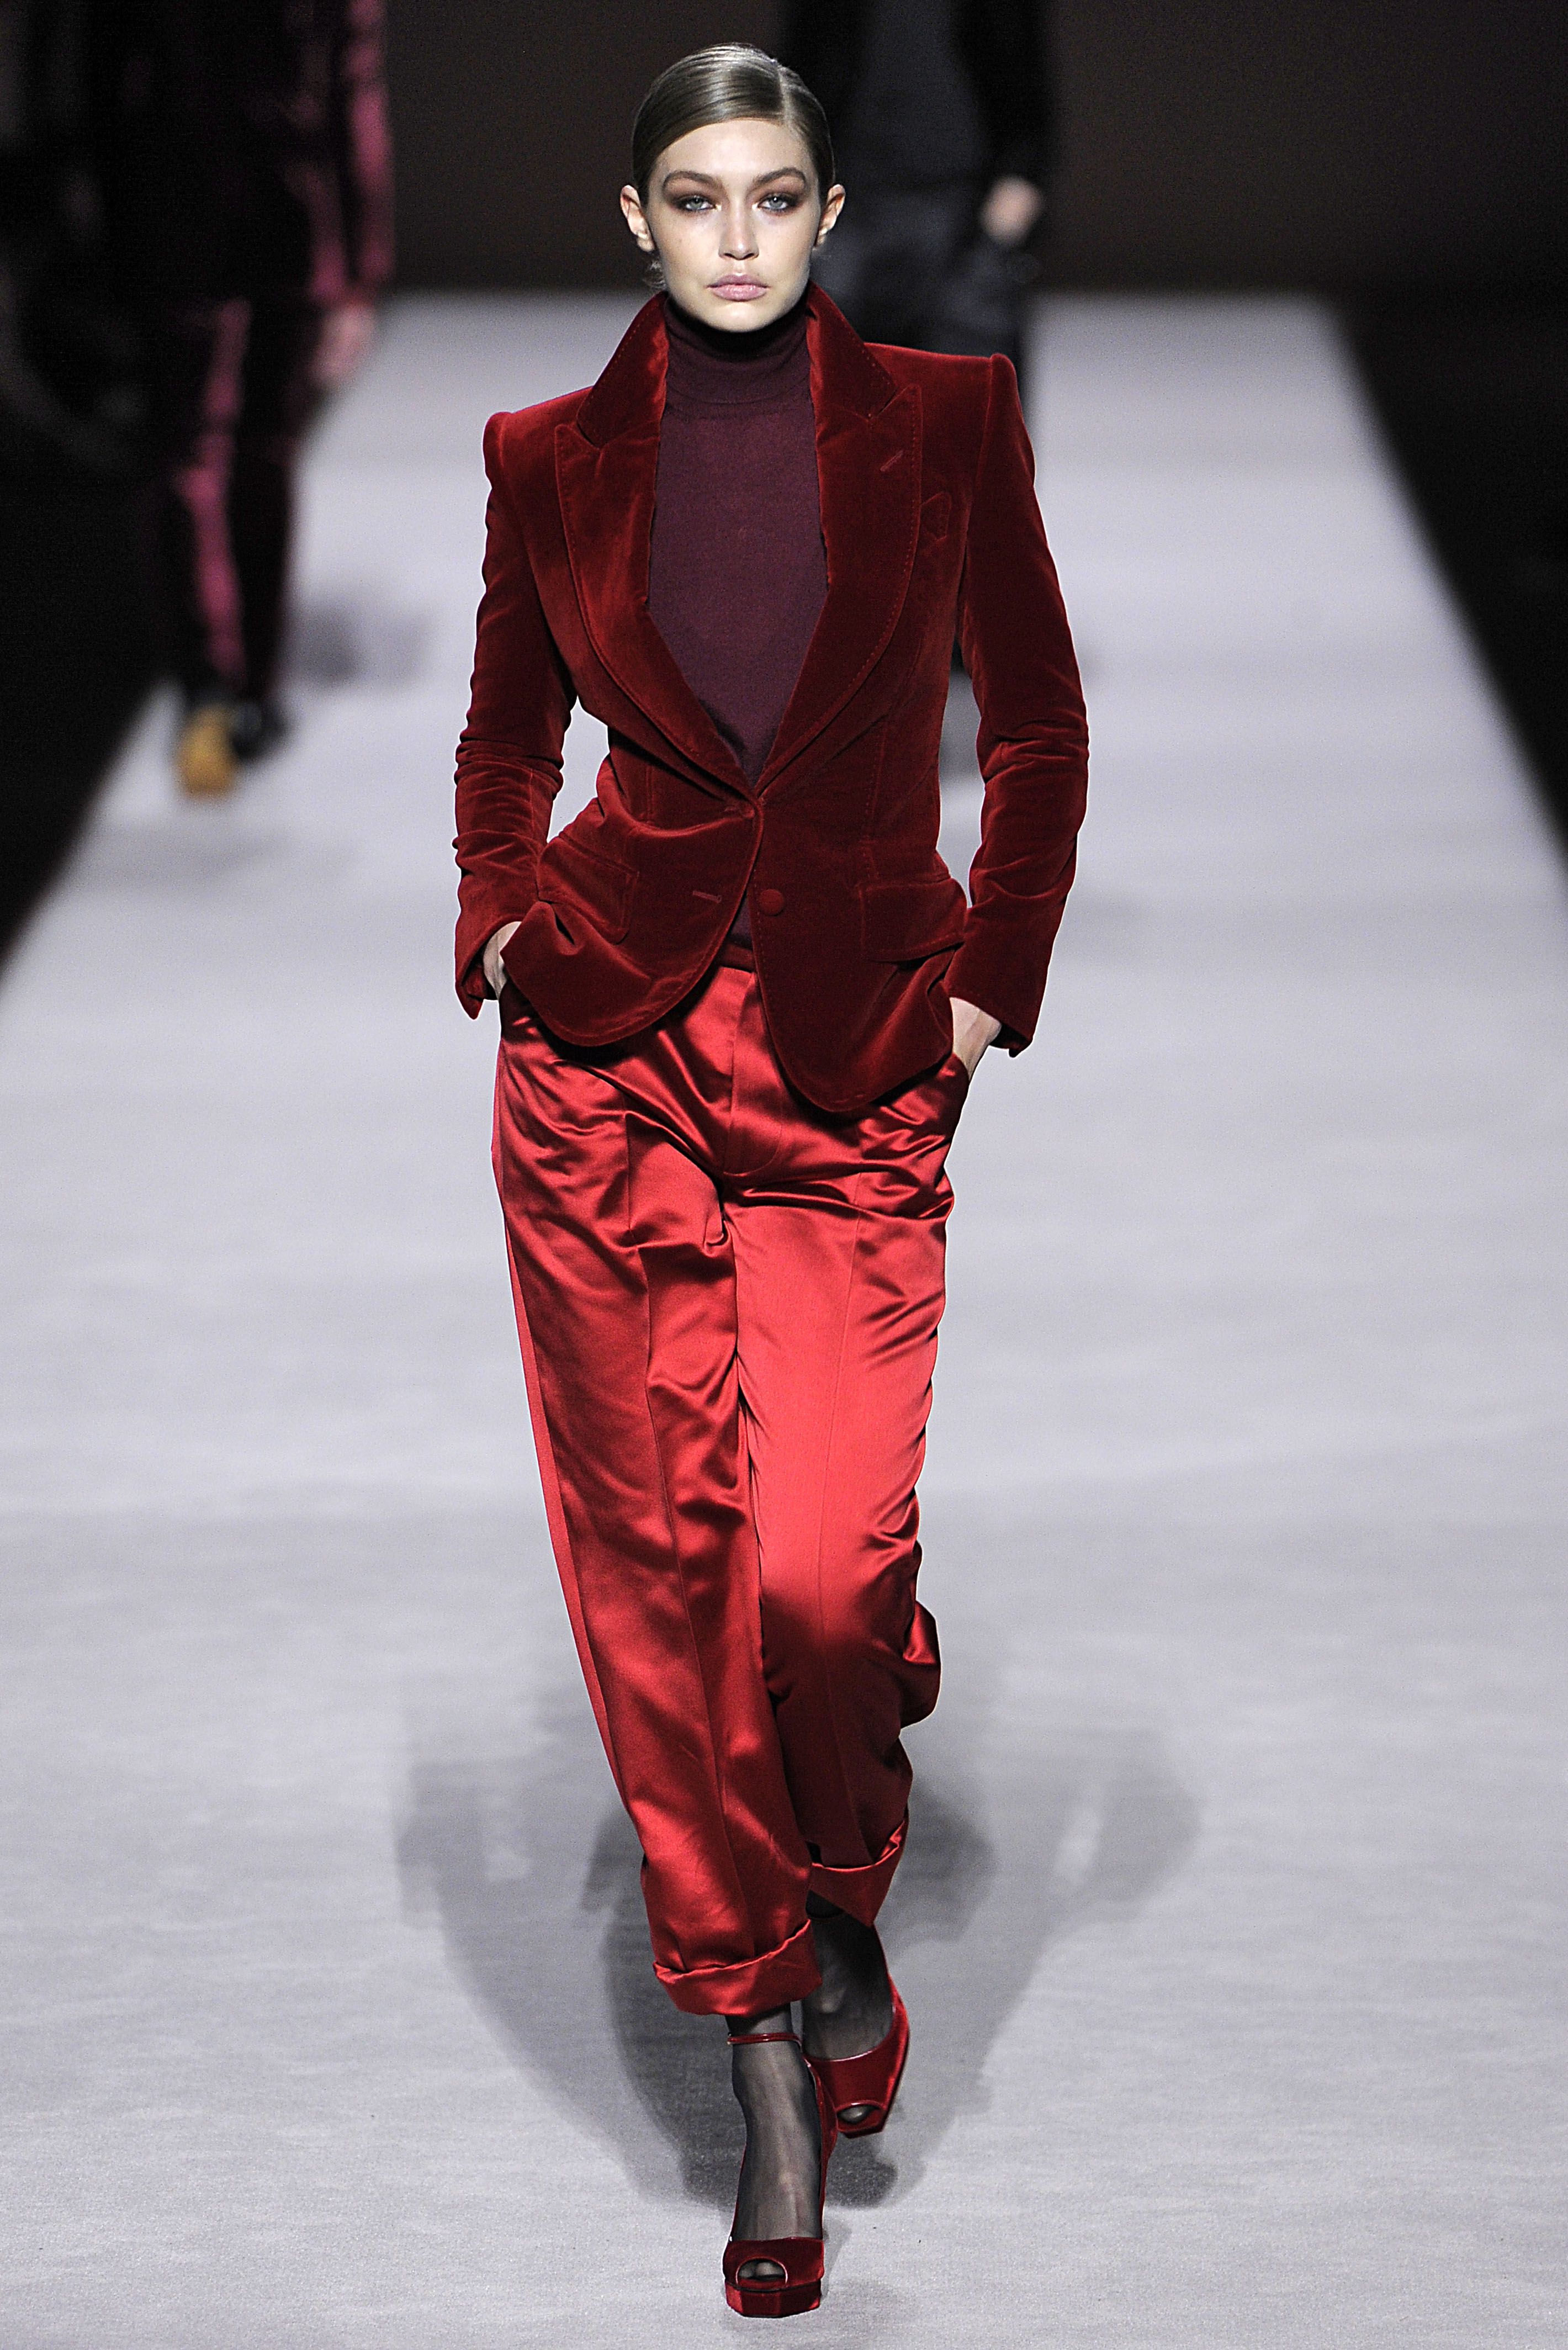 Tom Ford Remakes That Iconic ’90s Red Velvet Suit – Style and beauty